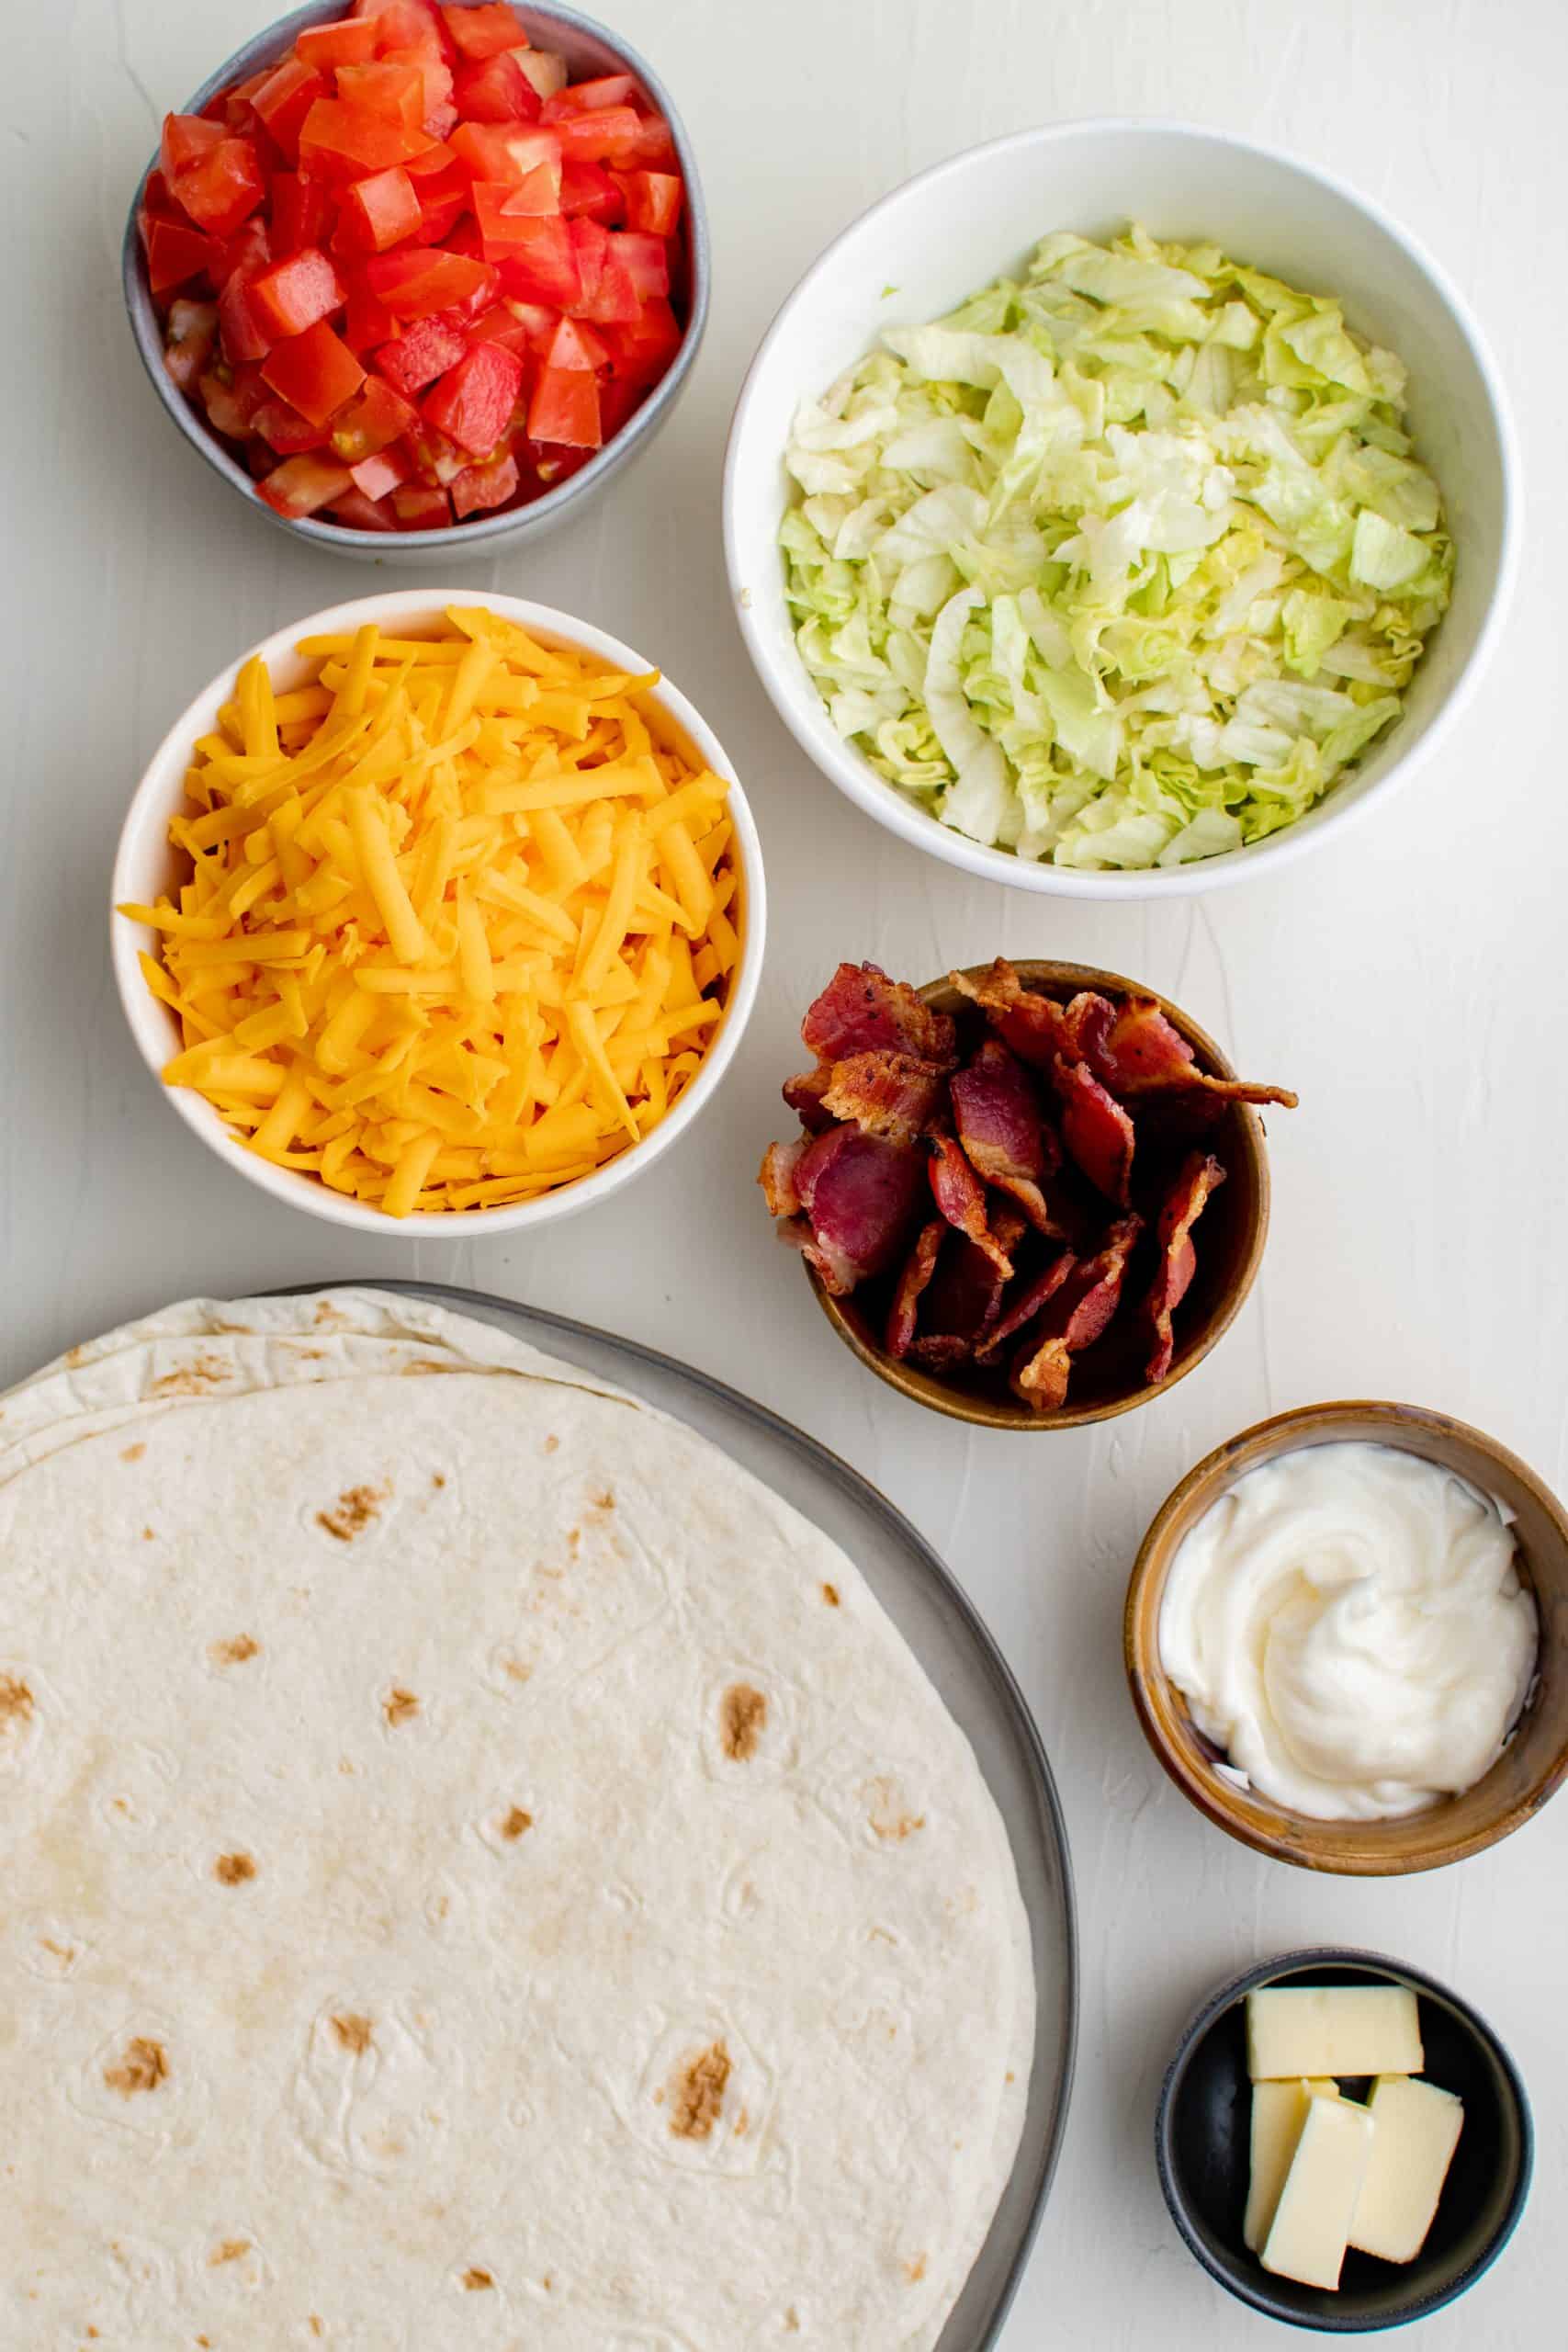 diced tomatoes, shredded cheddar cheese, shredded lettuce, cooked bacon and flour tortillas.